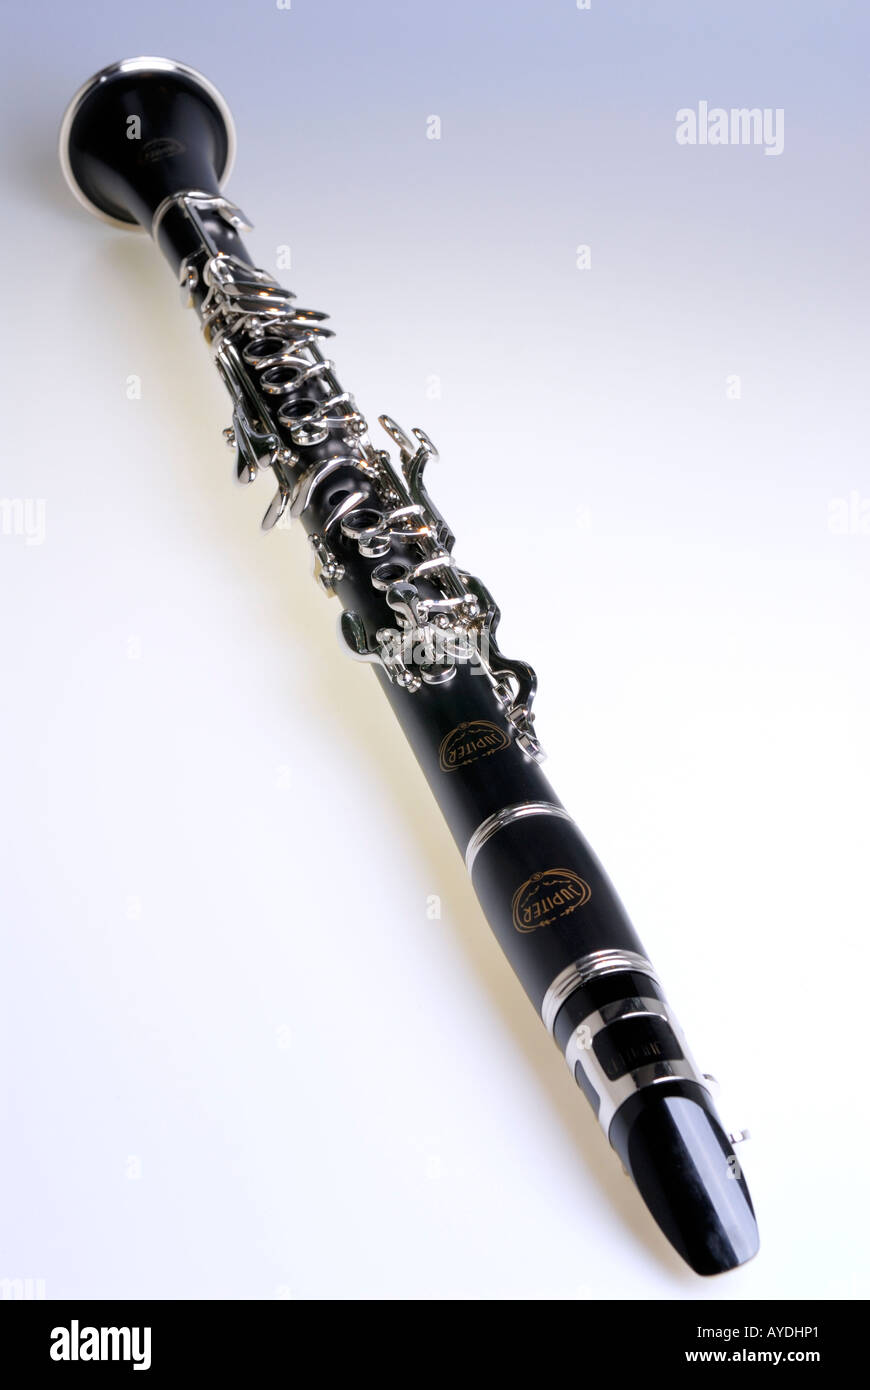 Full shot of a Boehm B flat clarinet on a white background Stock Photo